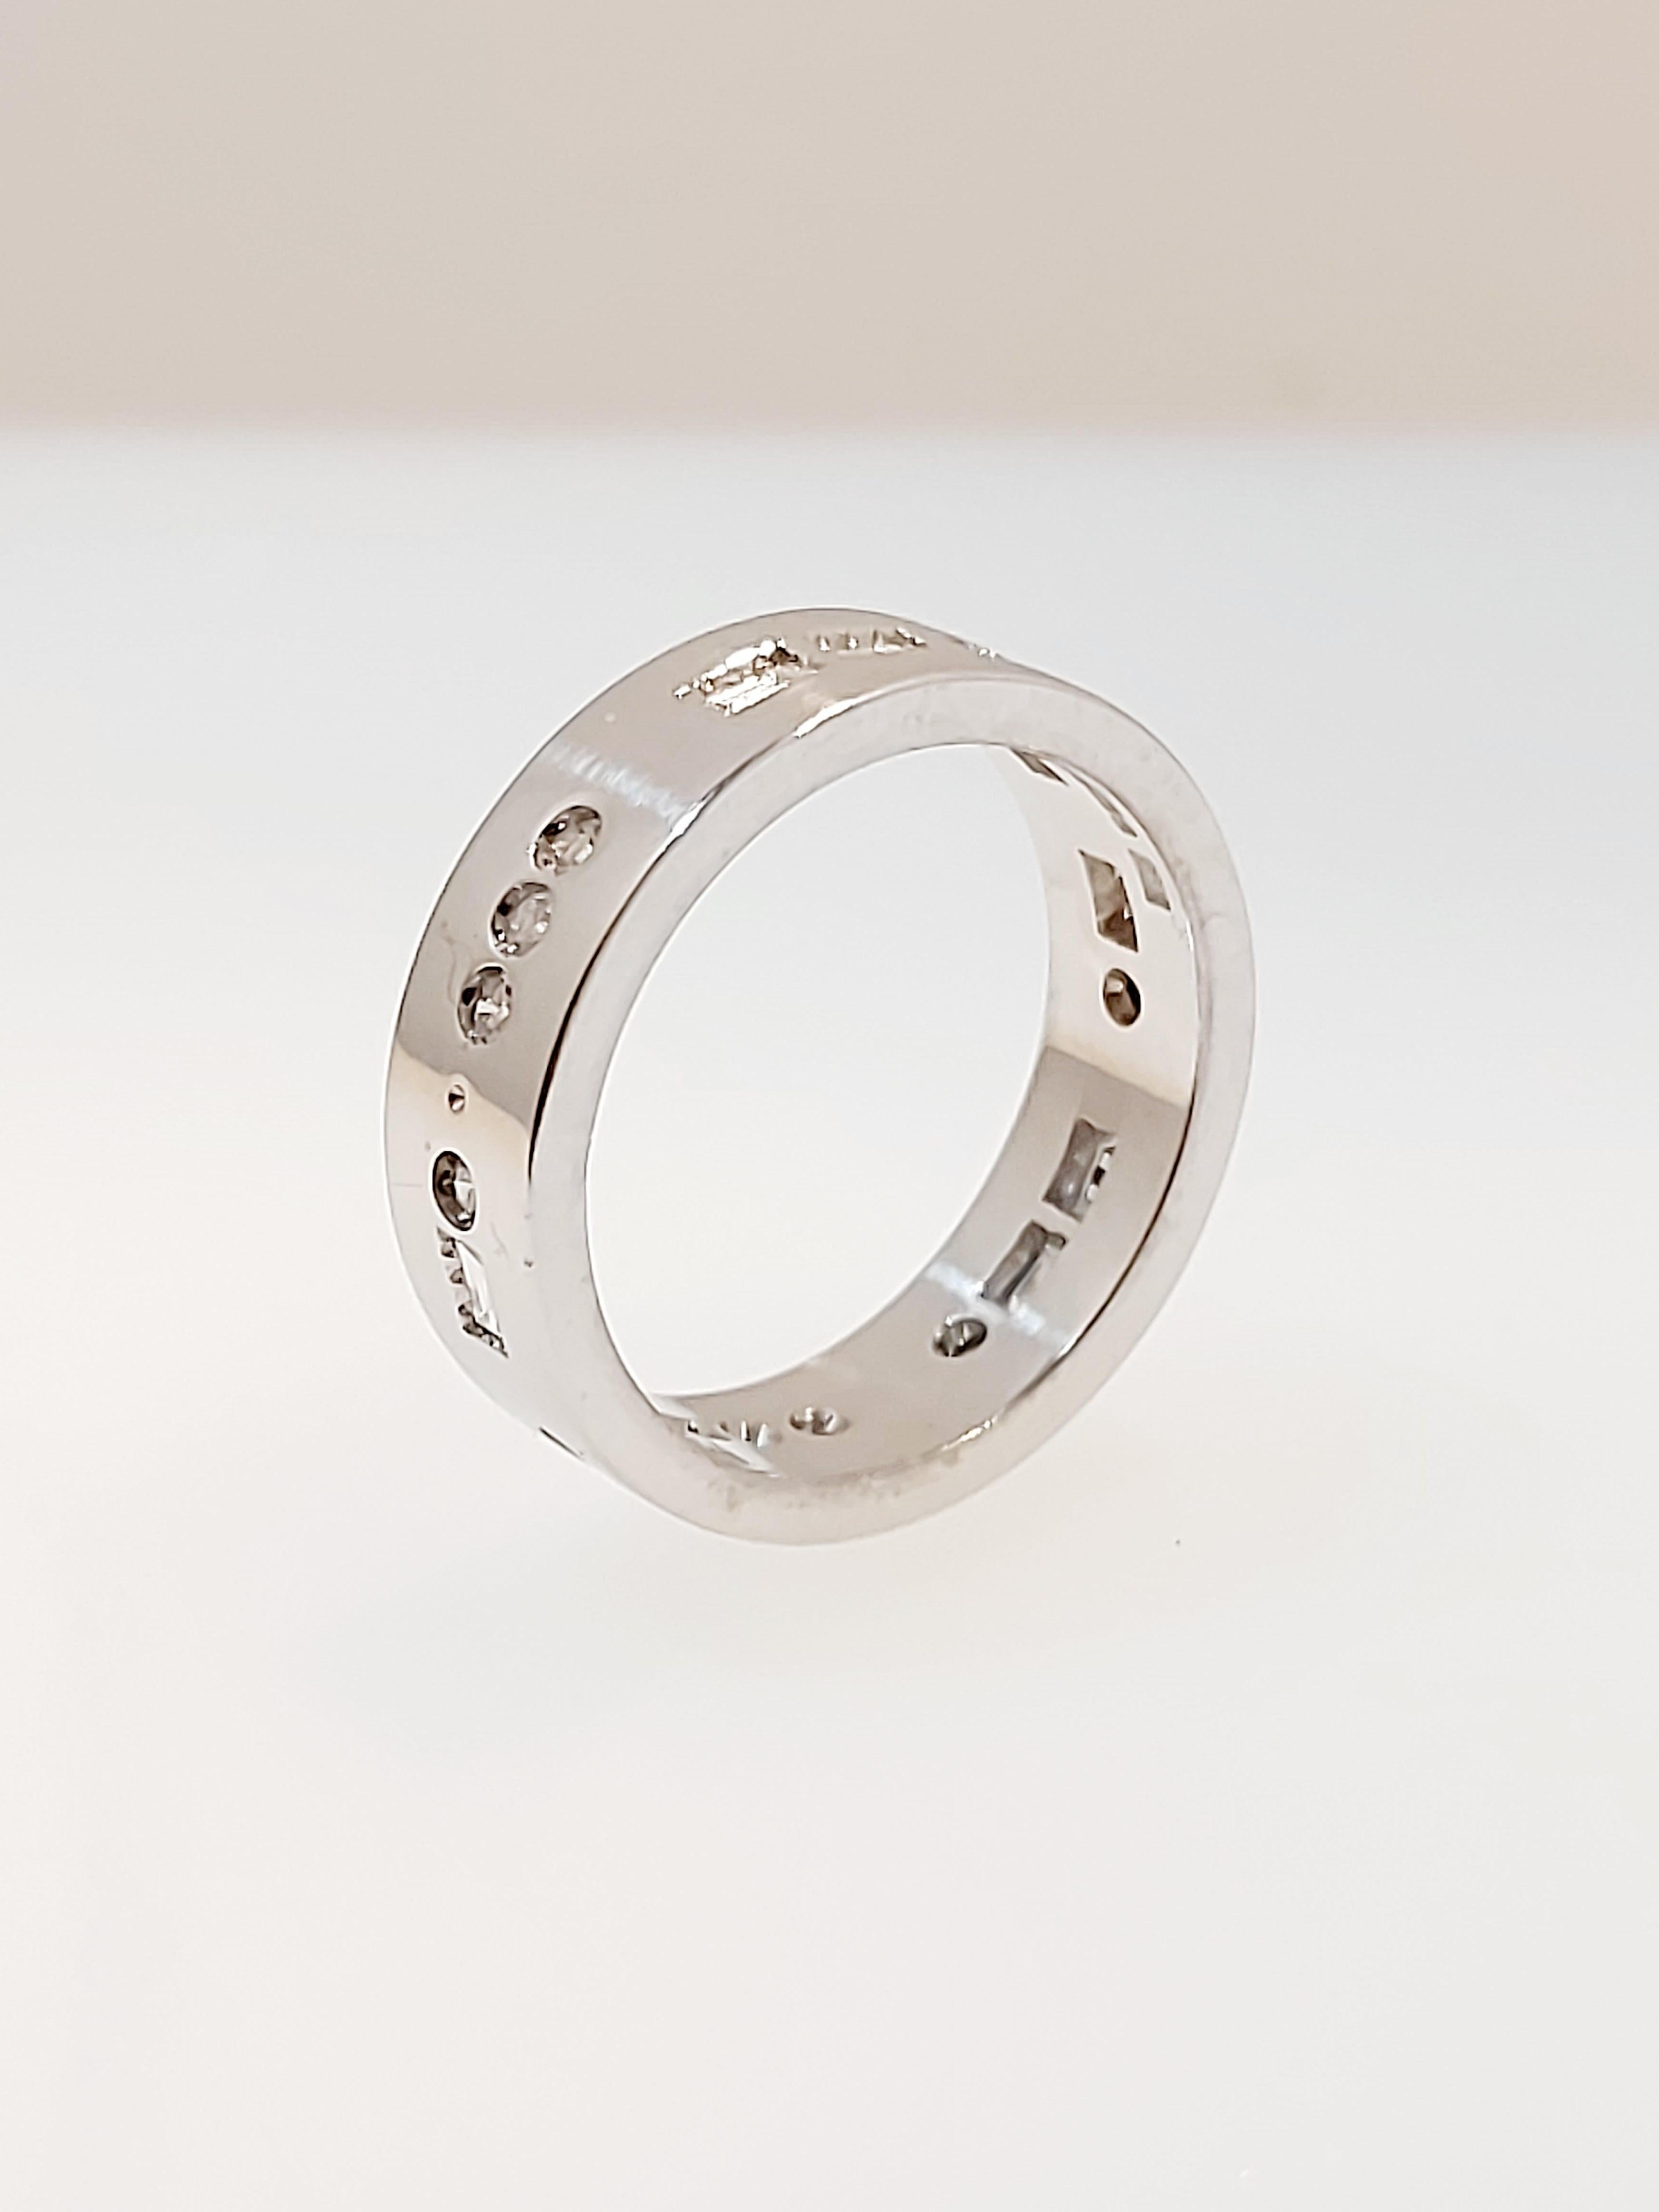 Diamond set Morse code ring spelling “Always” with baguette and brilliant cut diamonds total weight  .56ct,  colour G, clarity VS1. Designed and made by Eric N Smith of Glasgow 6.2mm wide depth 1.9mm size 58.
